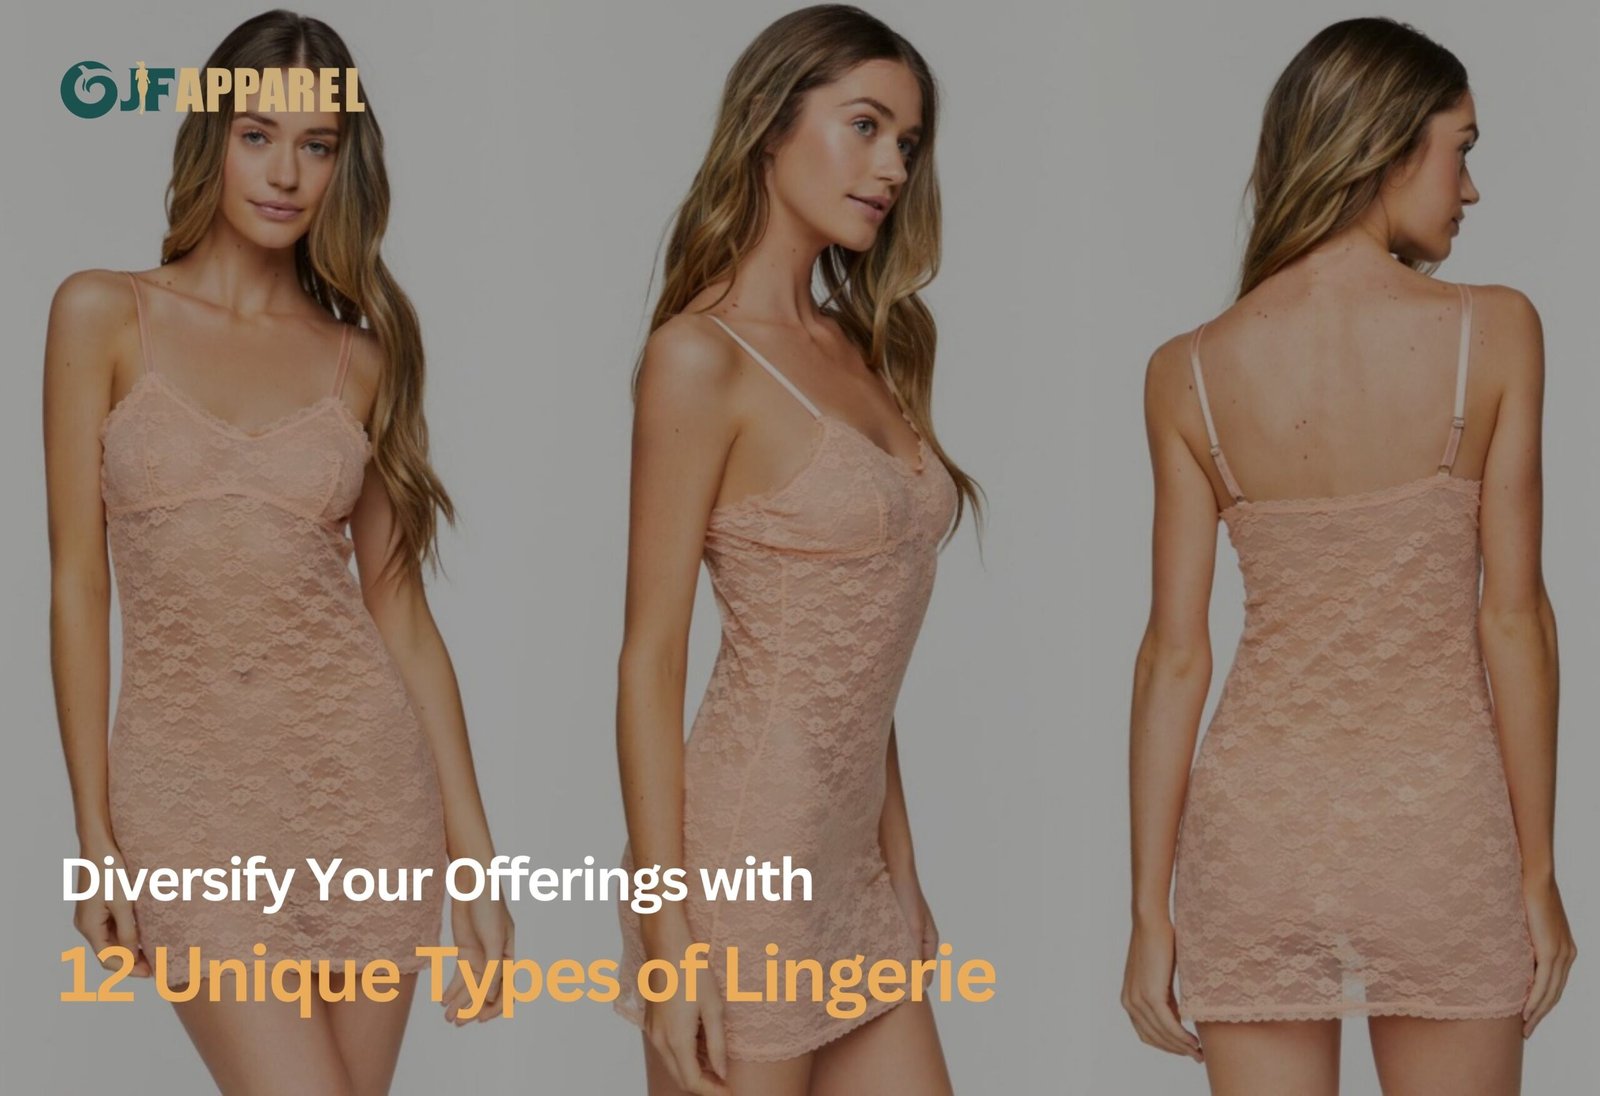 Diversify Your Offerings with 12 Unique Types of Lingerie